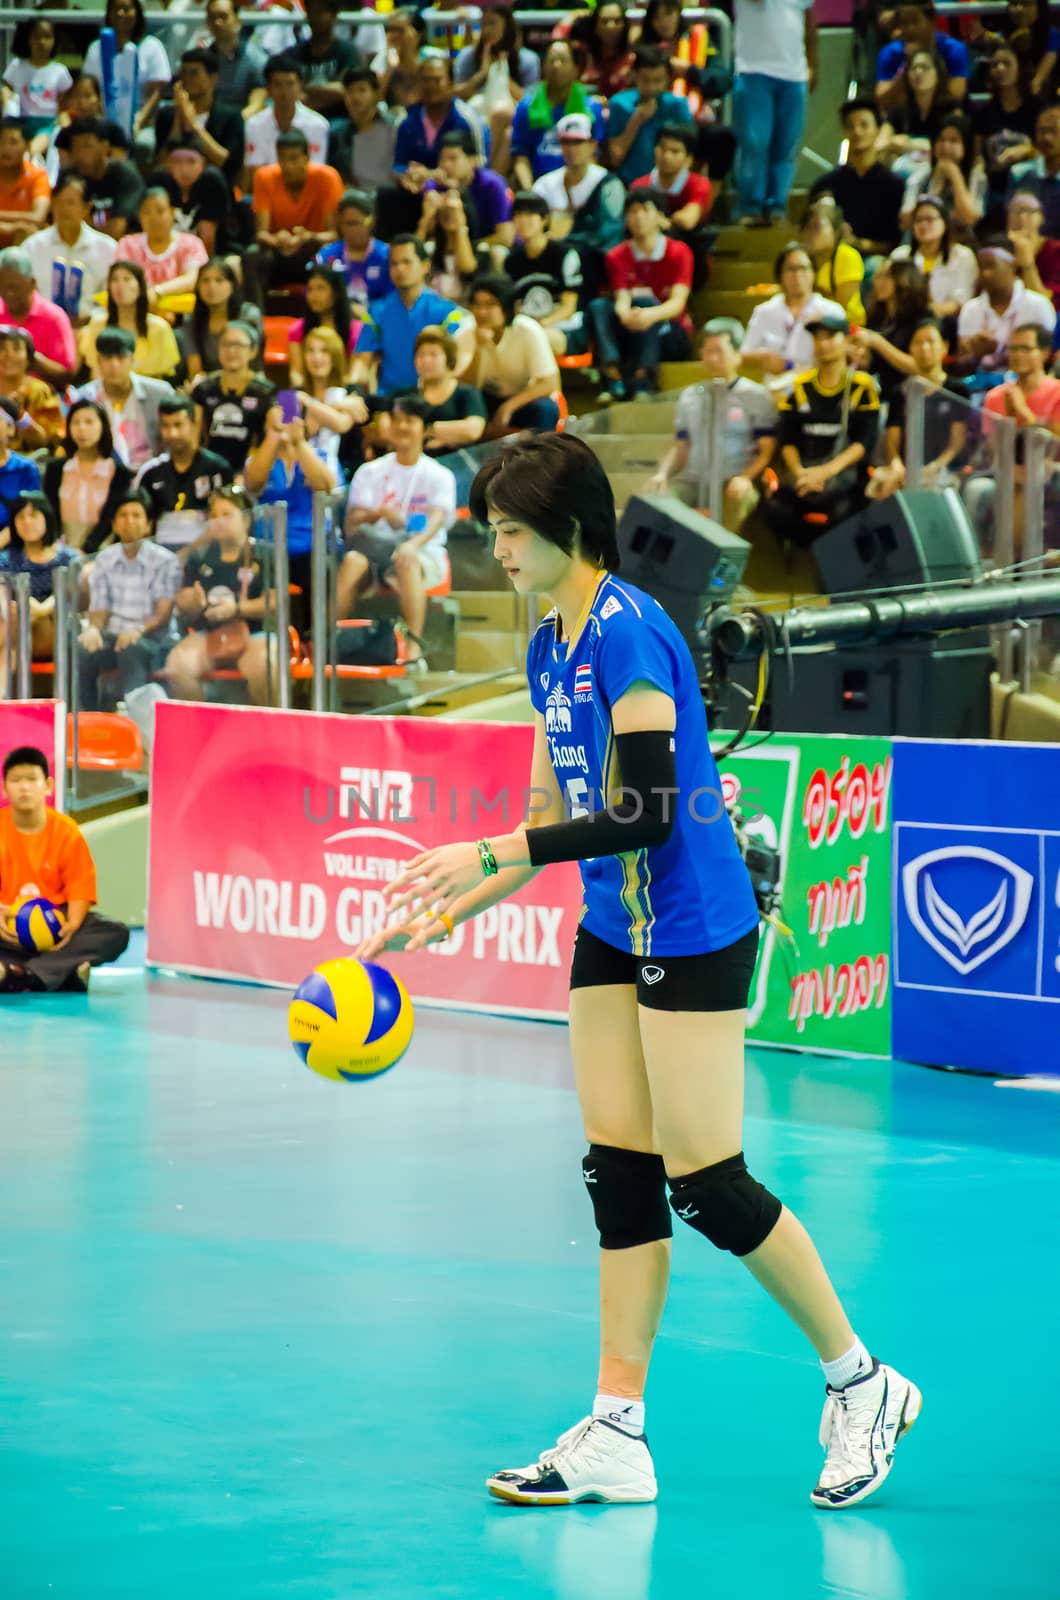 BANGKOK - AUGUST 16: Pleumjit Thinkaow of Thailand Volleyball Team in action during The Volleyball World Grand Prix 2014 at Indoor Stadium Huamark on August 16, 2014 in Bangkok, Thailand.